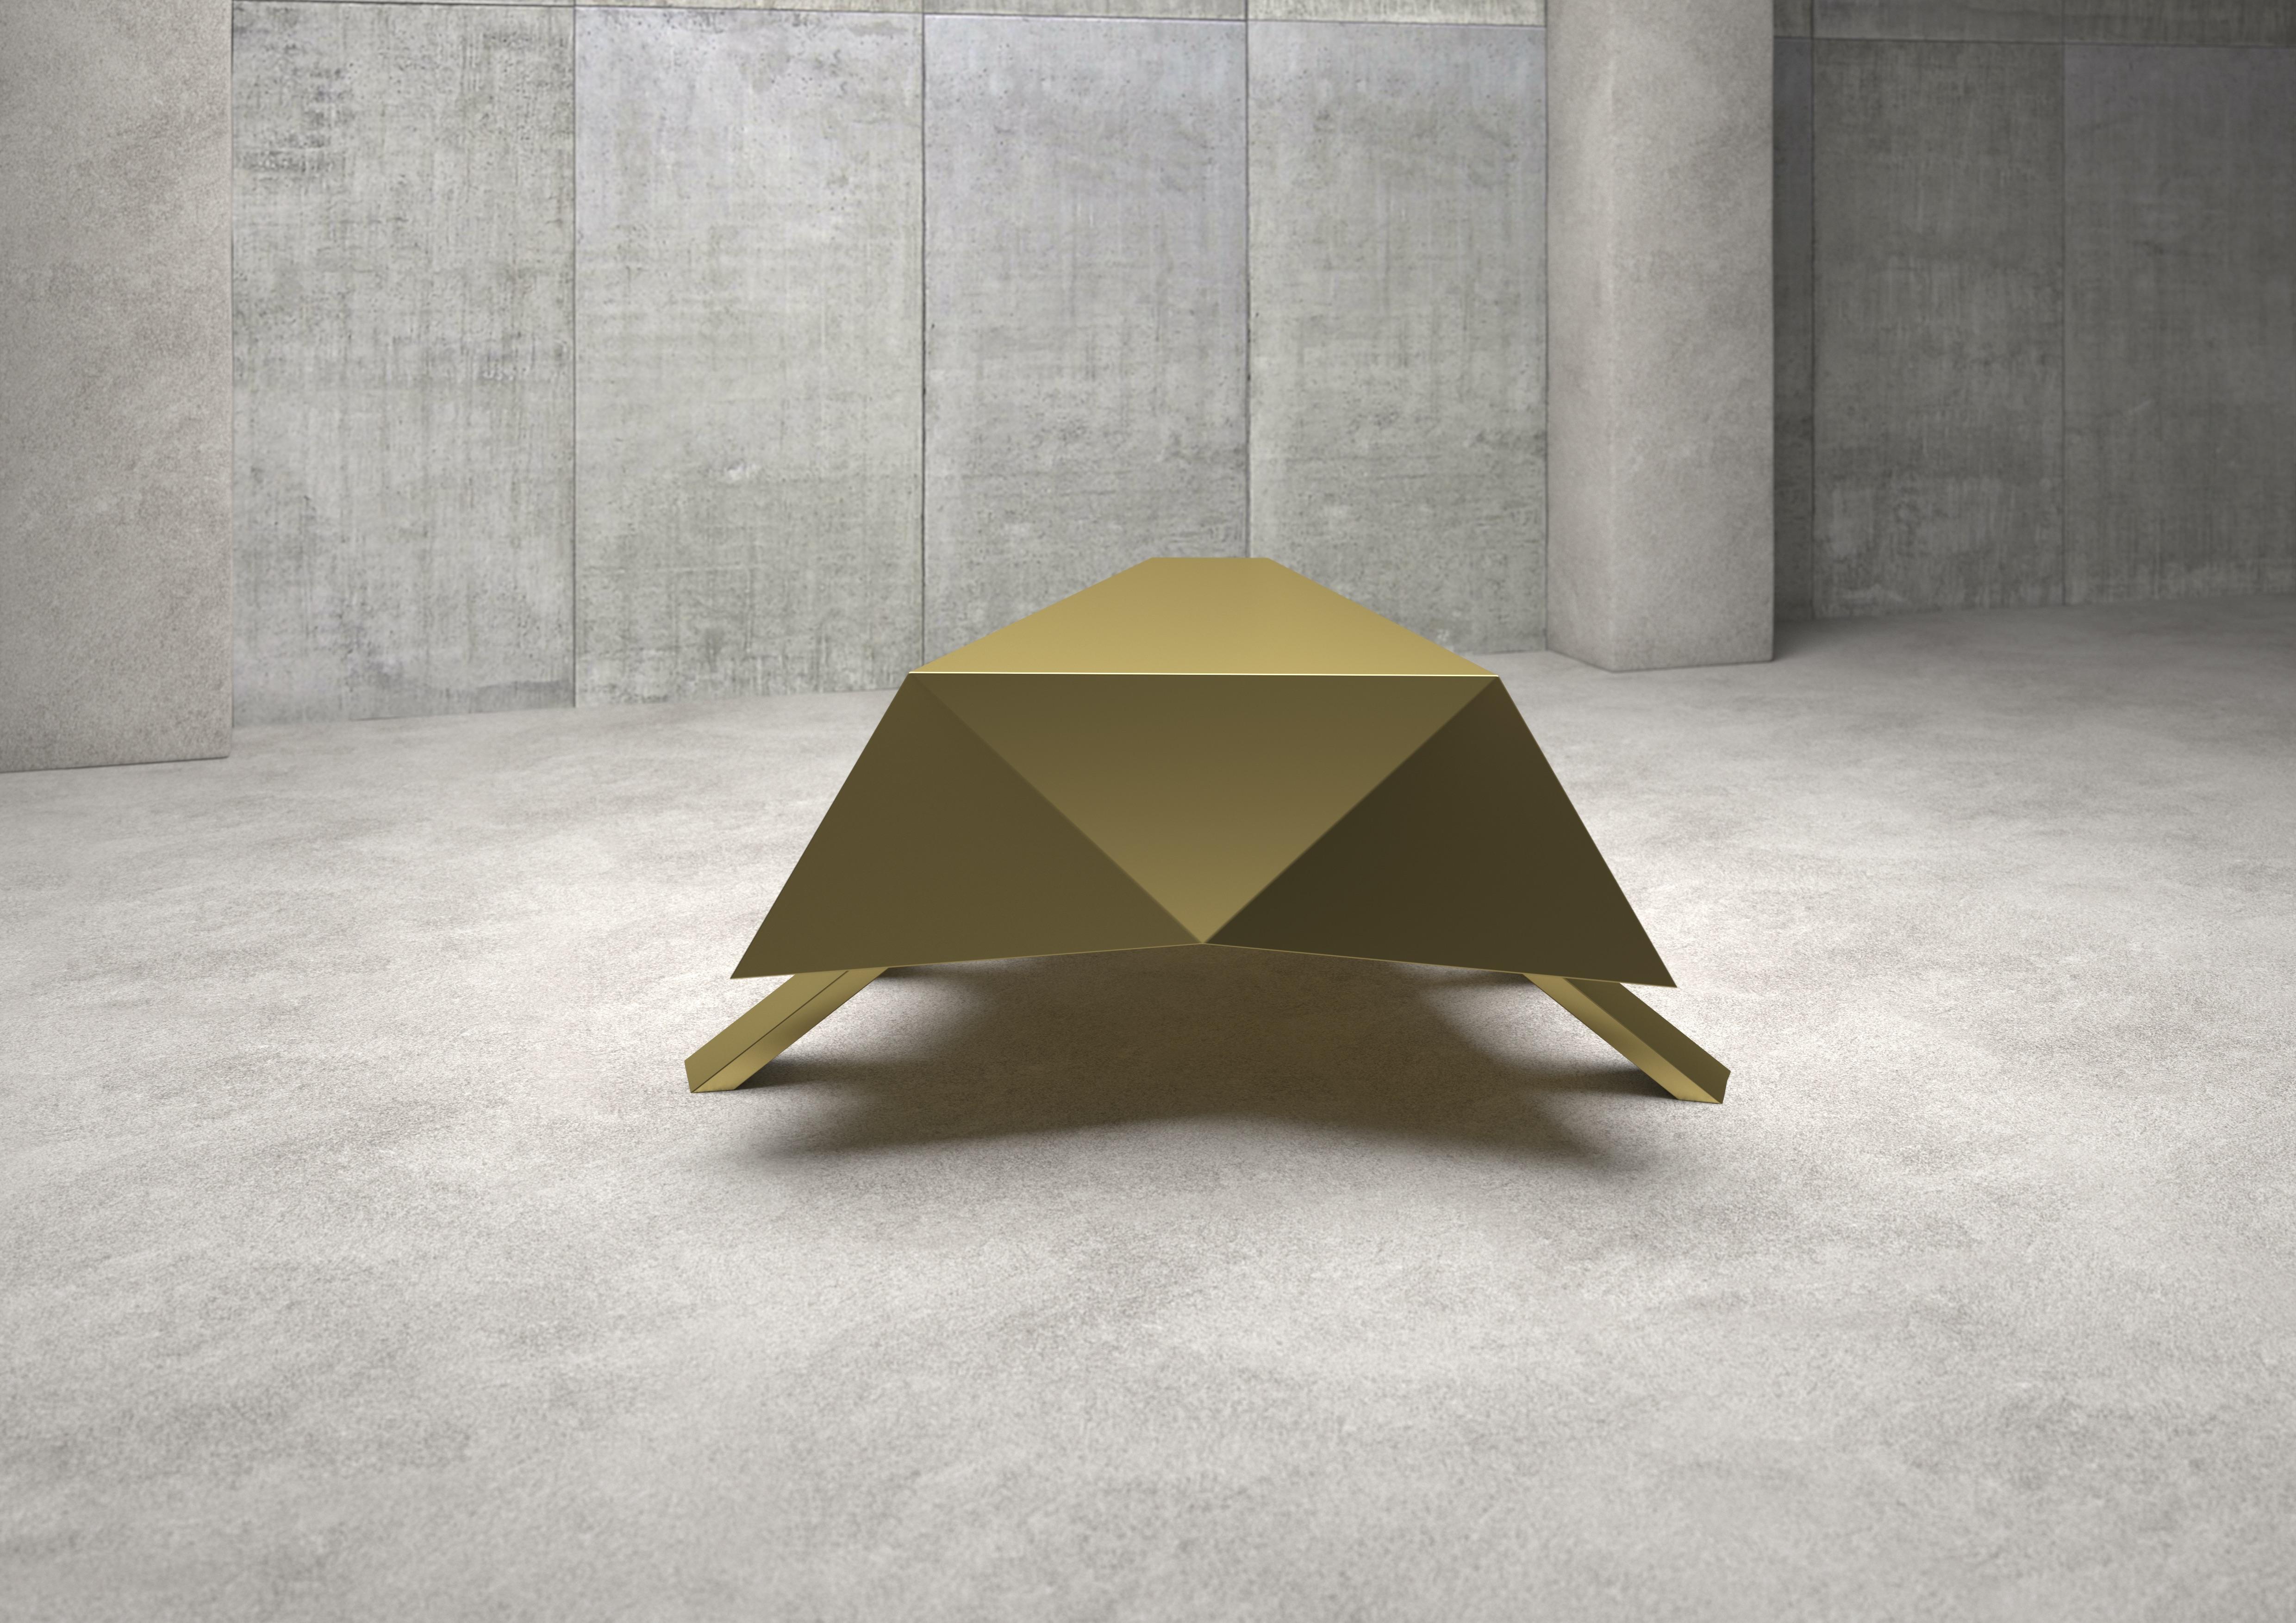 Insetto A sculpture coffee table totally in satin brass from the Nature collection designed by Sergio Ragalzi. Limited edition of three pieces. Produced for Superego Editions.
Numbered and signed.

Biography
Sergio Ragalzi was born in Turin in